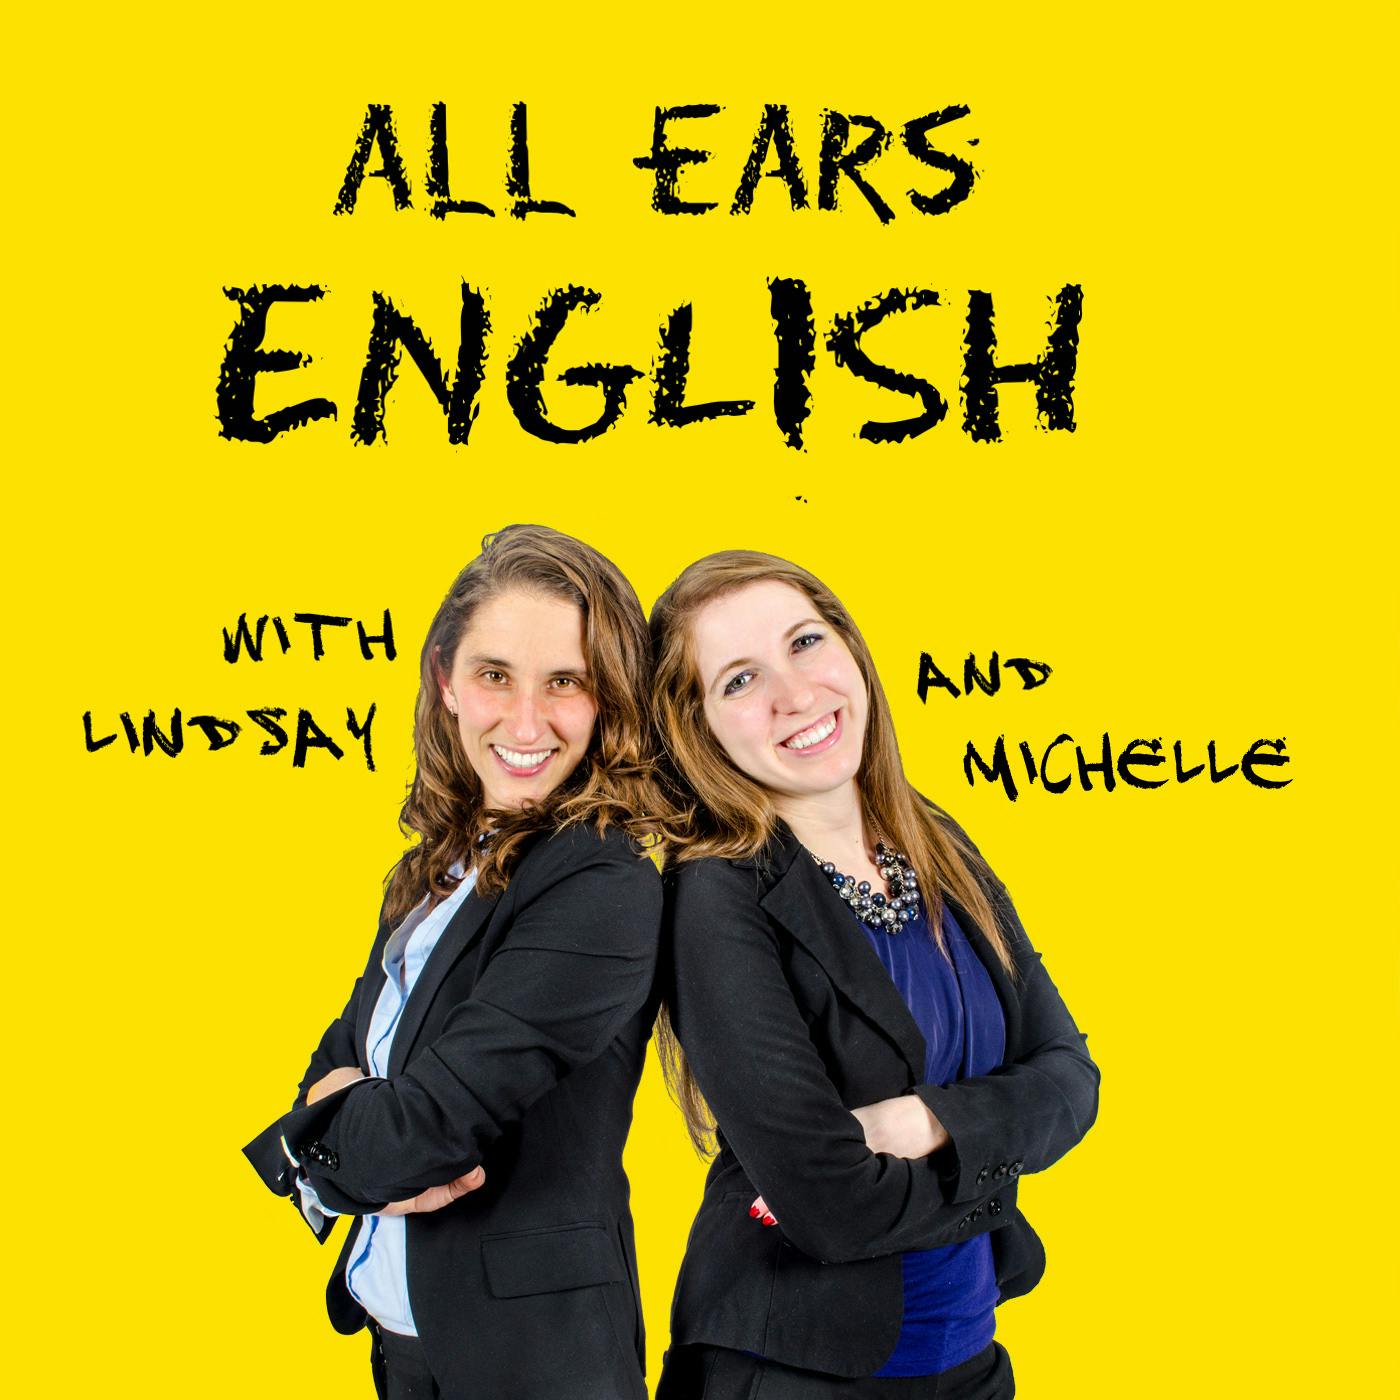 AEE 1395: How to Build Your Relationships Virtually and 3 English Phrases to Get Started